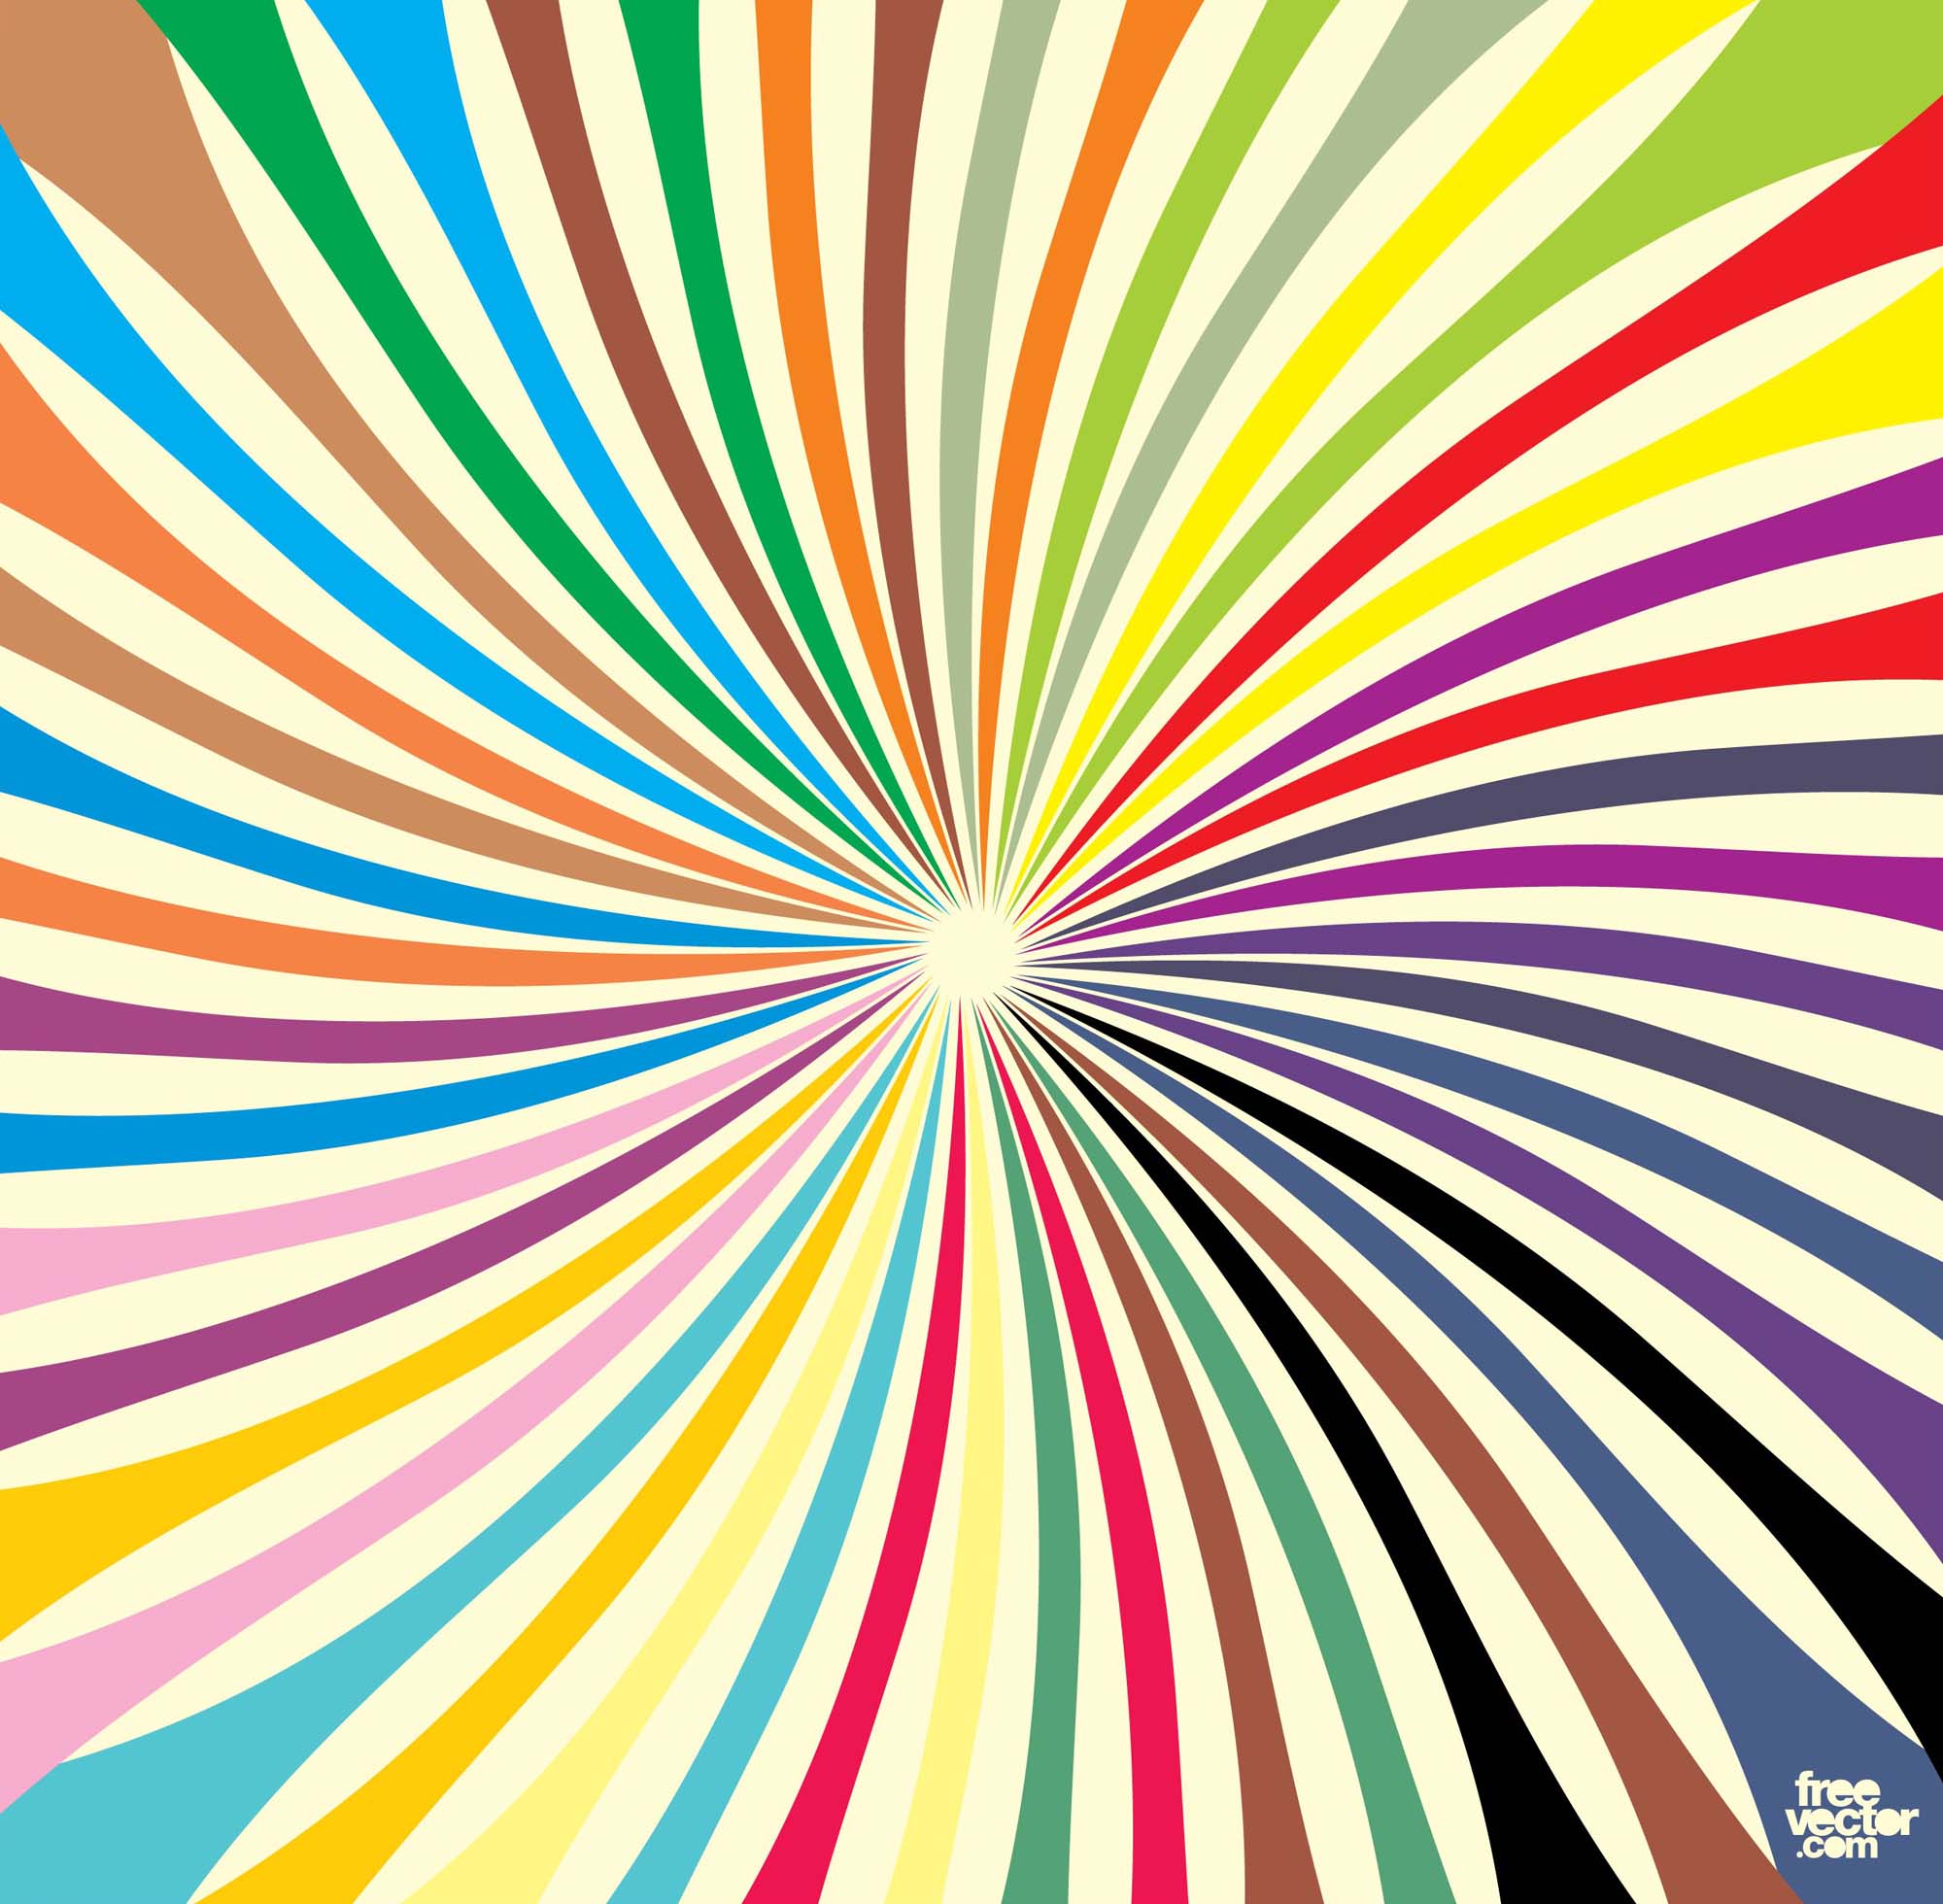 Colorful Starburst Vector Art & Graphics | freevector.com